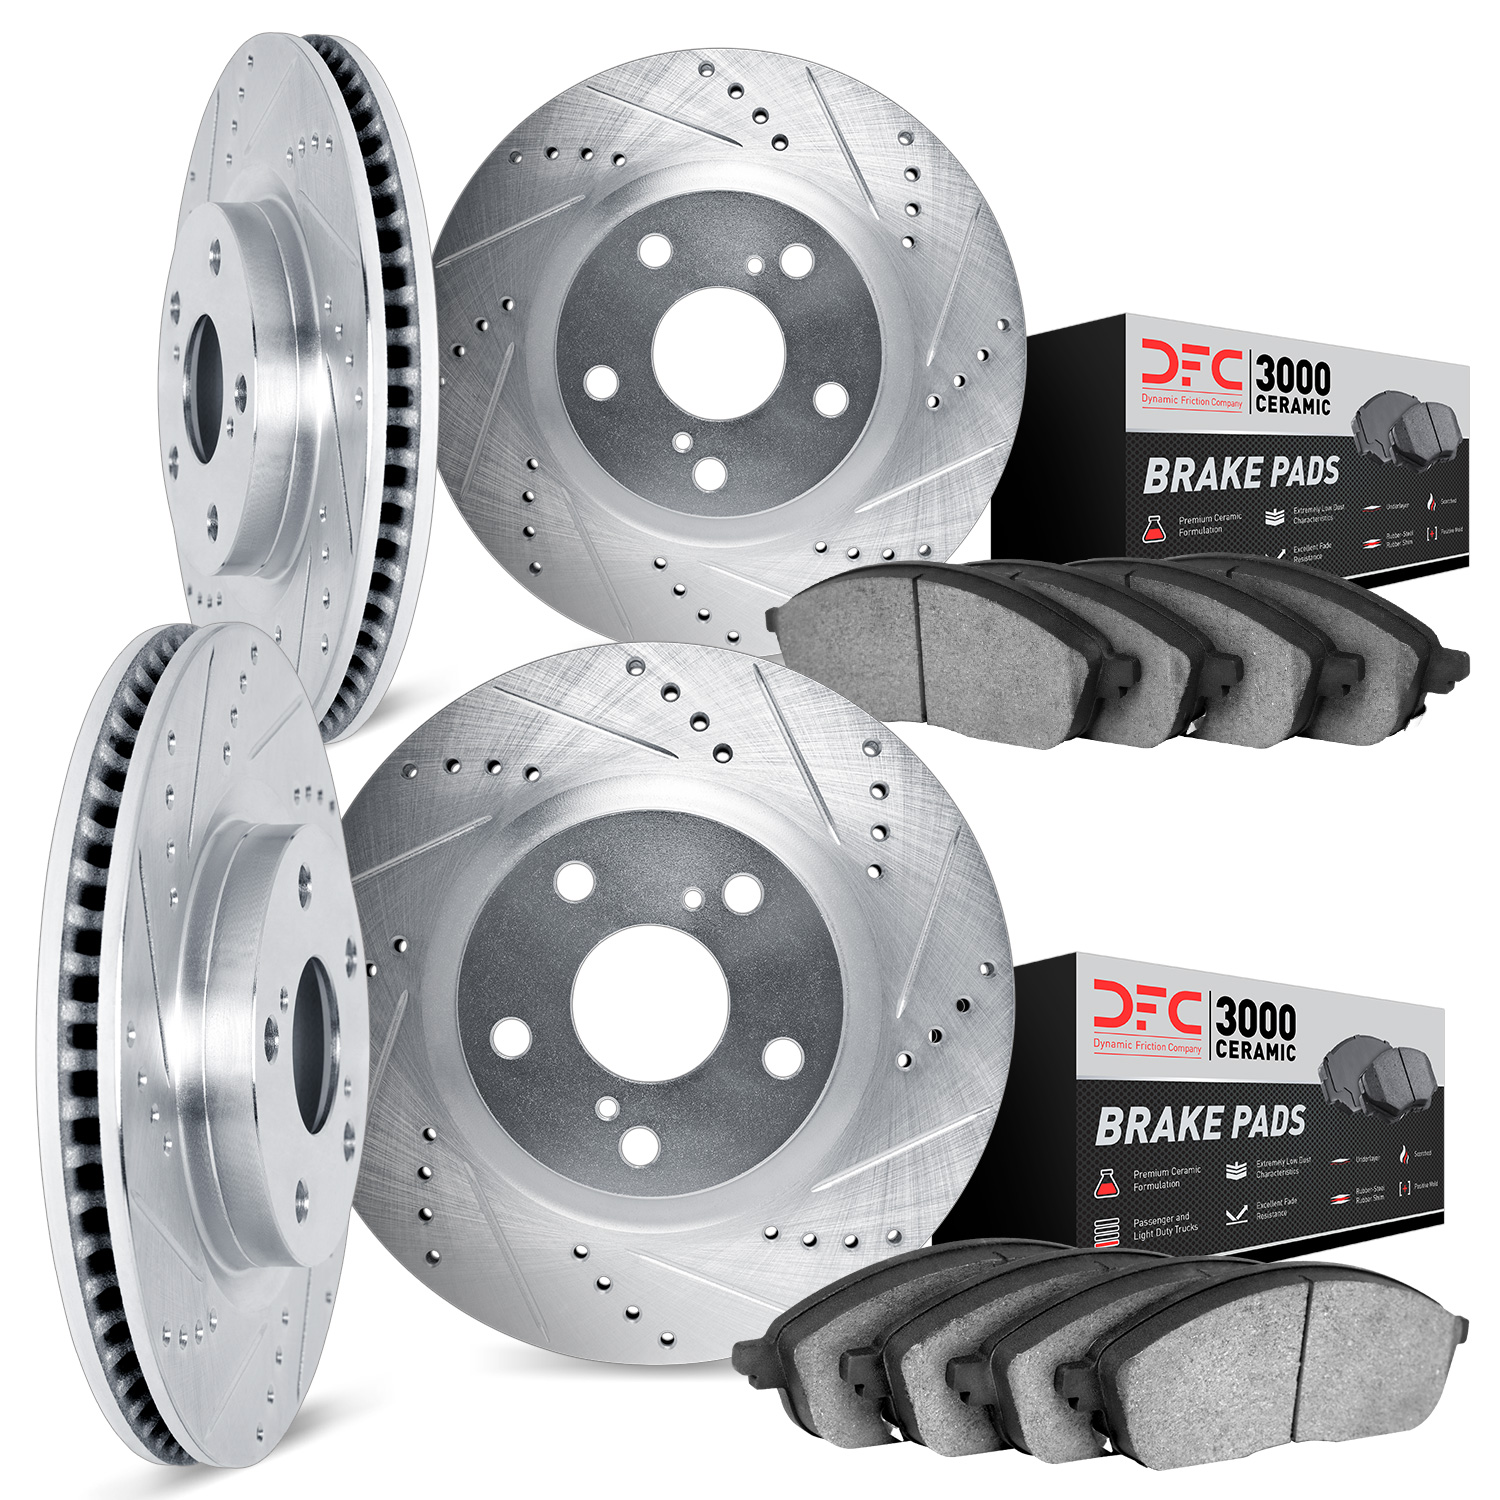 7304-54086 Drilled/Slotted Brake Rotor with 3000-Series Ceramic Brake Pads Kit [Silver], 2007-2008 Ford/Lincoln/Mercury/Mazda, P